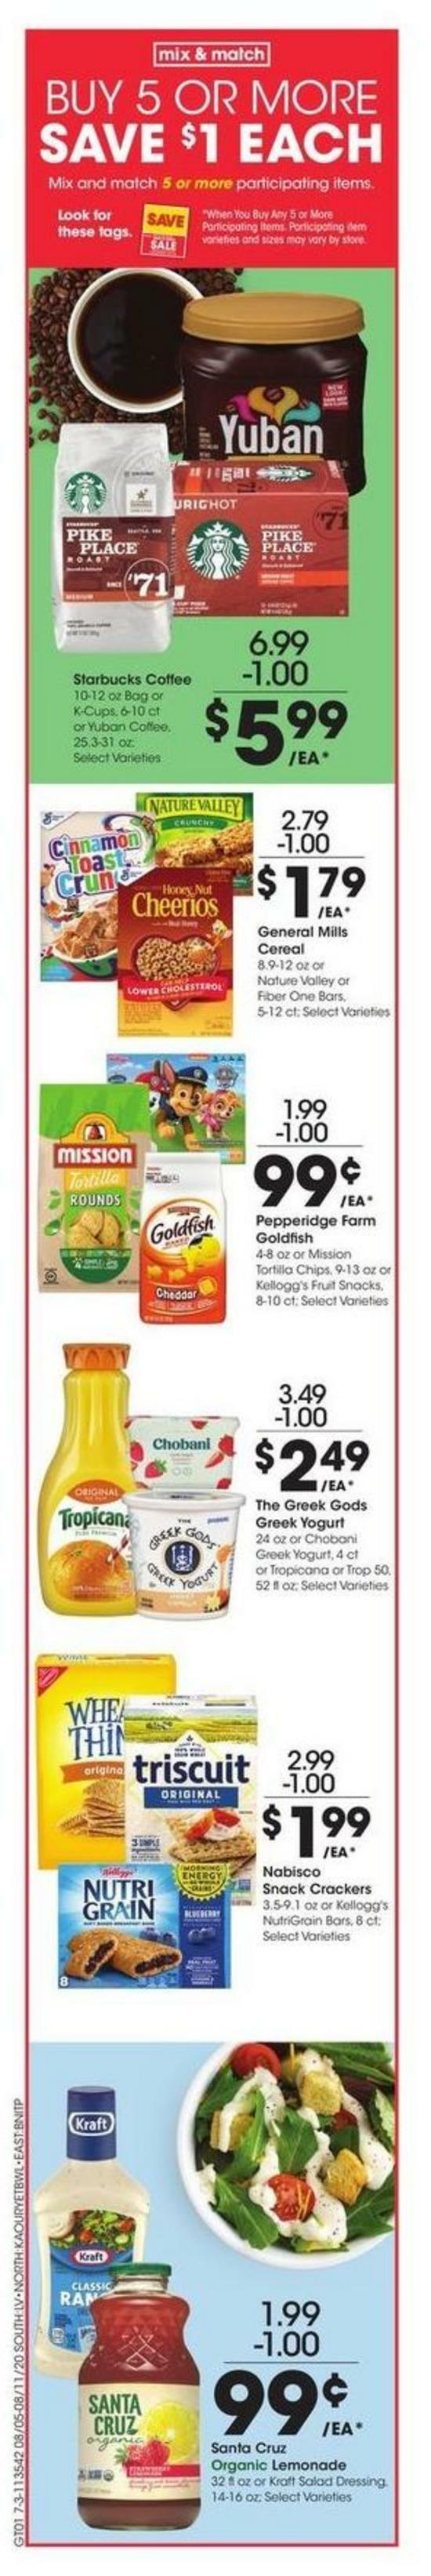 Fred Meyer Weekly Ad from August 5